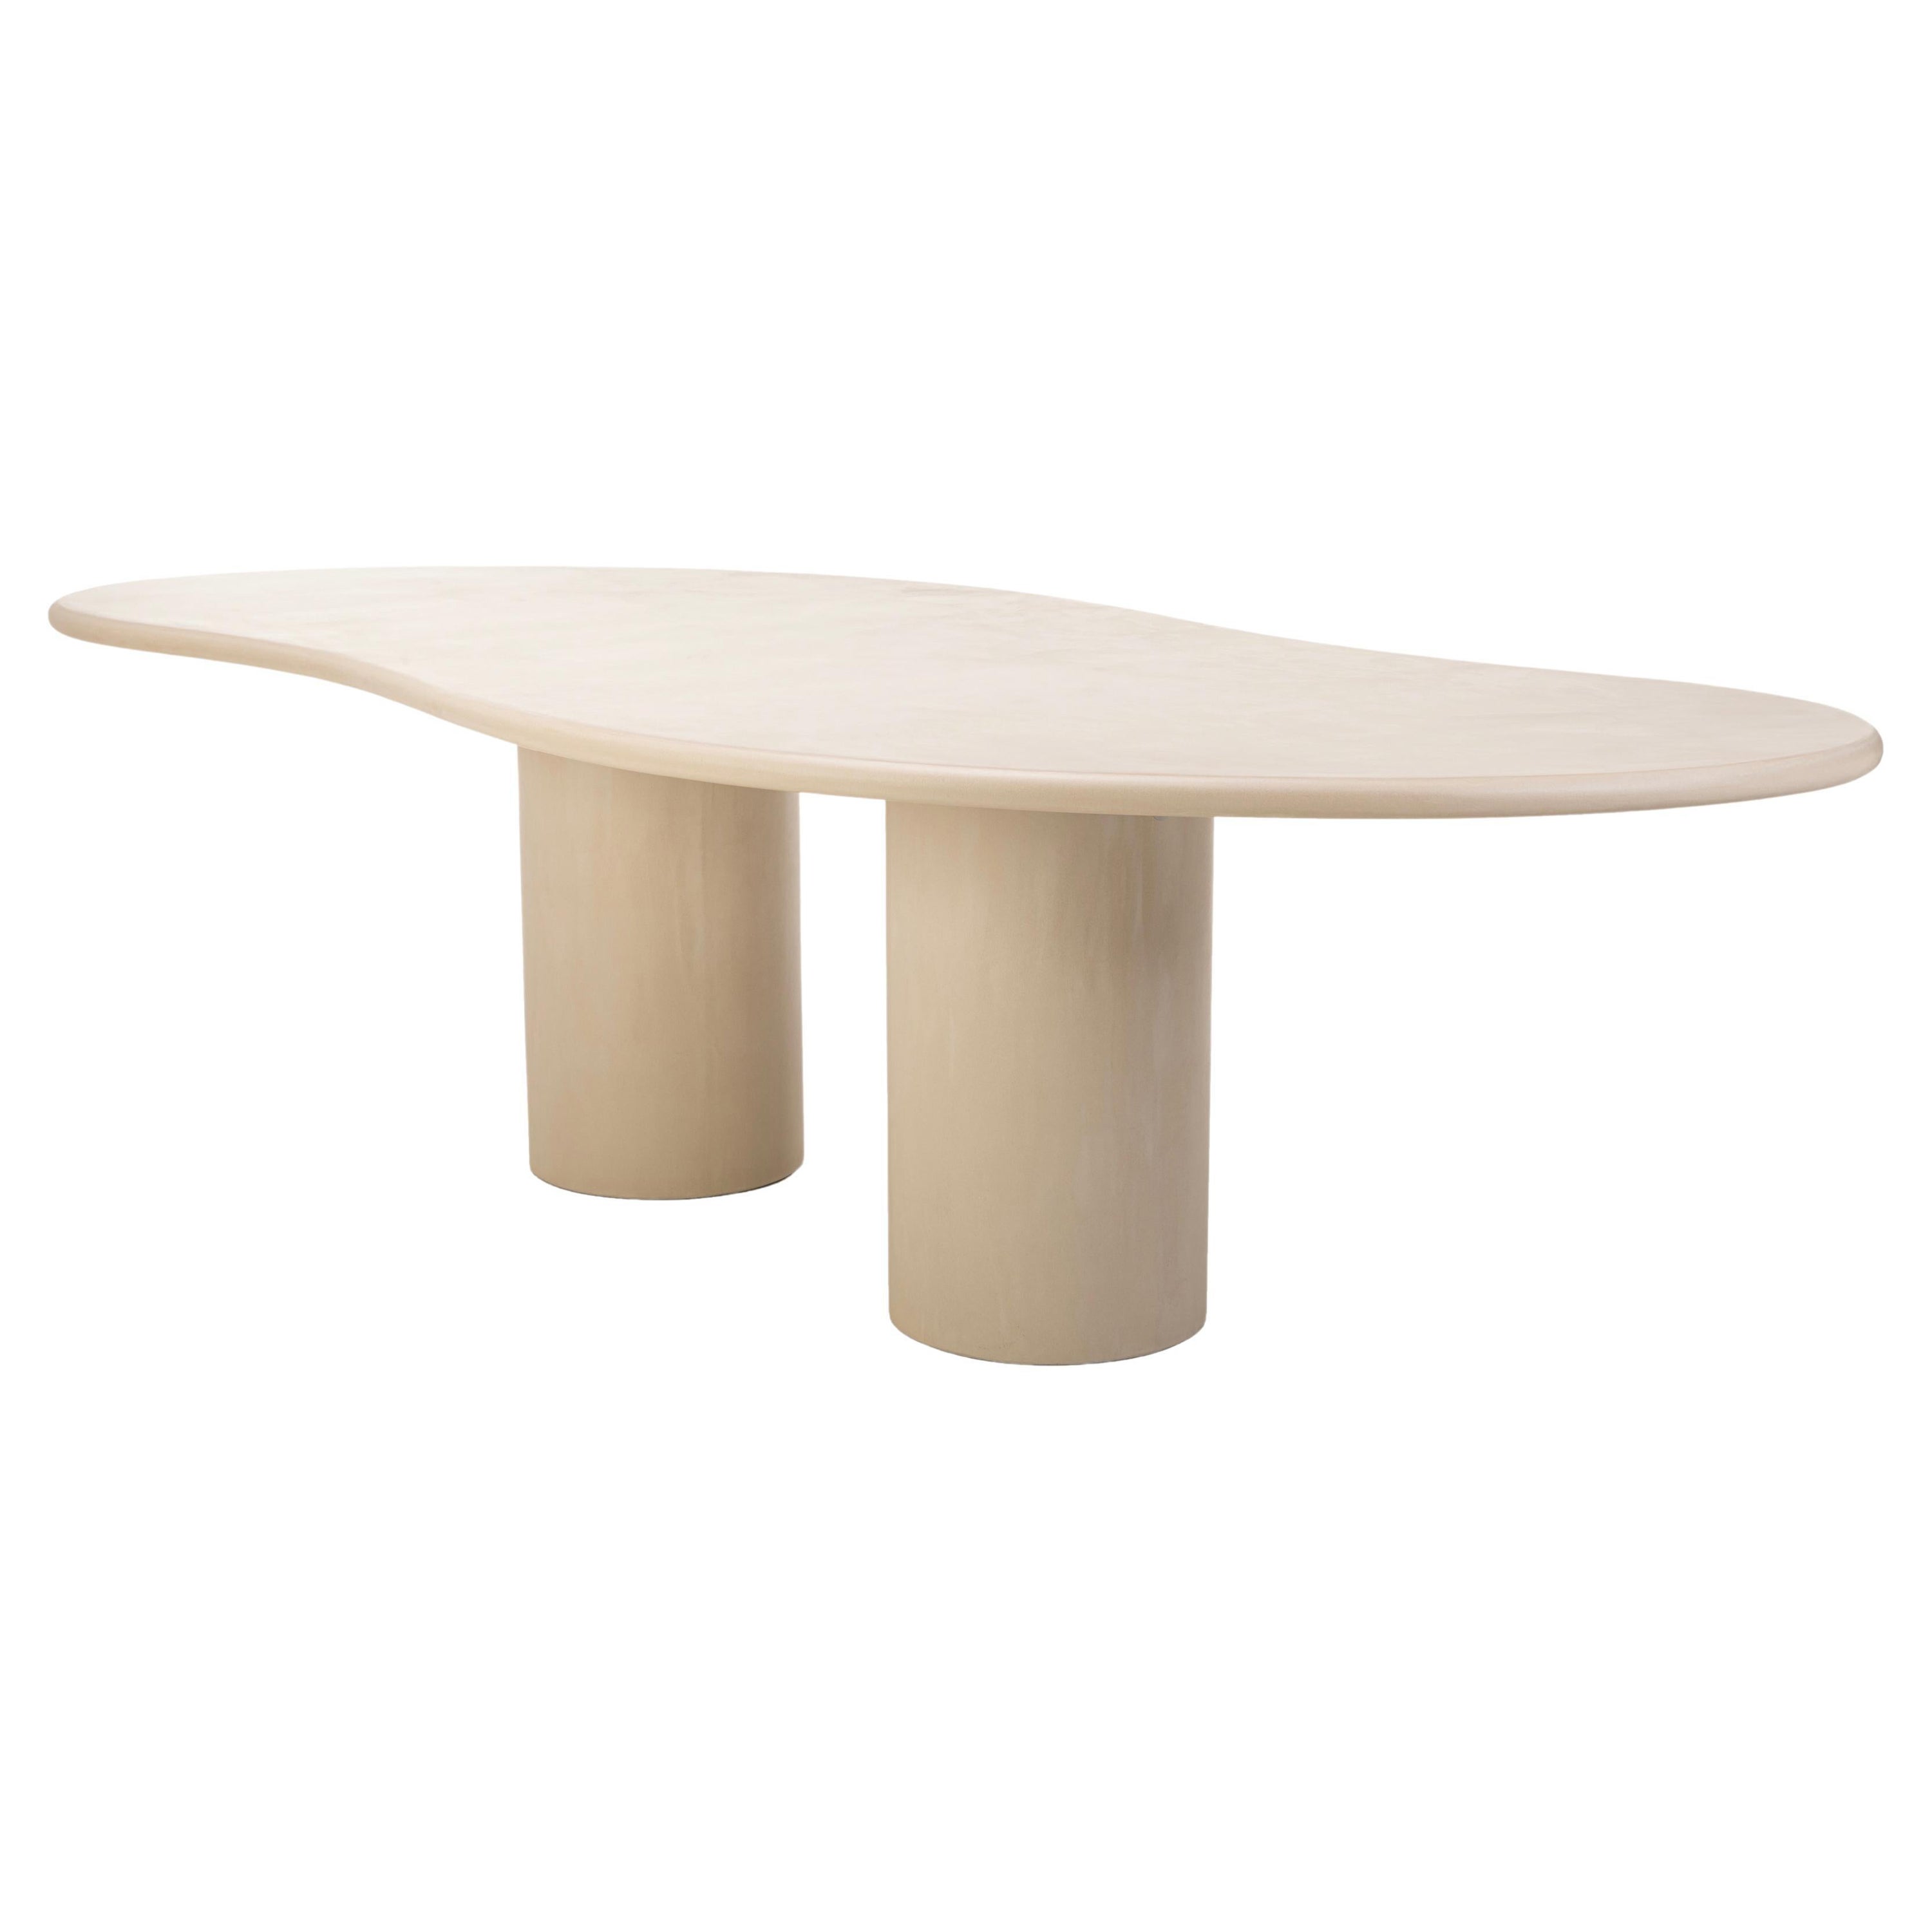 Mortex Dining Table "Latus" 260 by Isabelle Beaumont For Sale